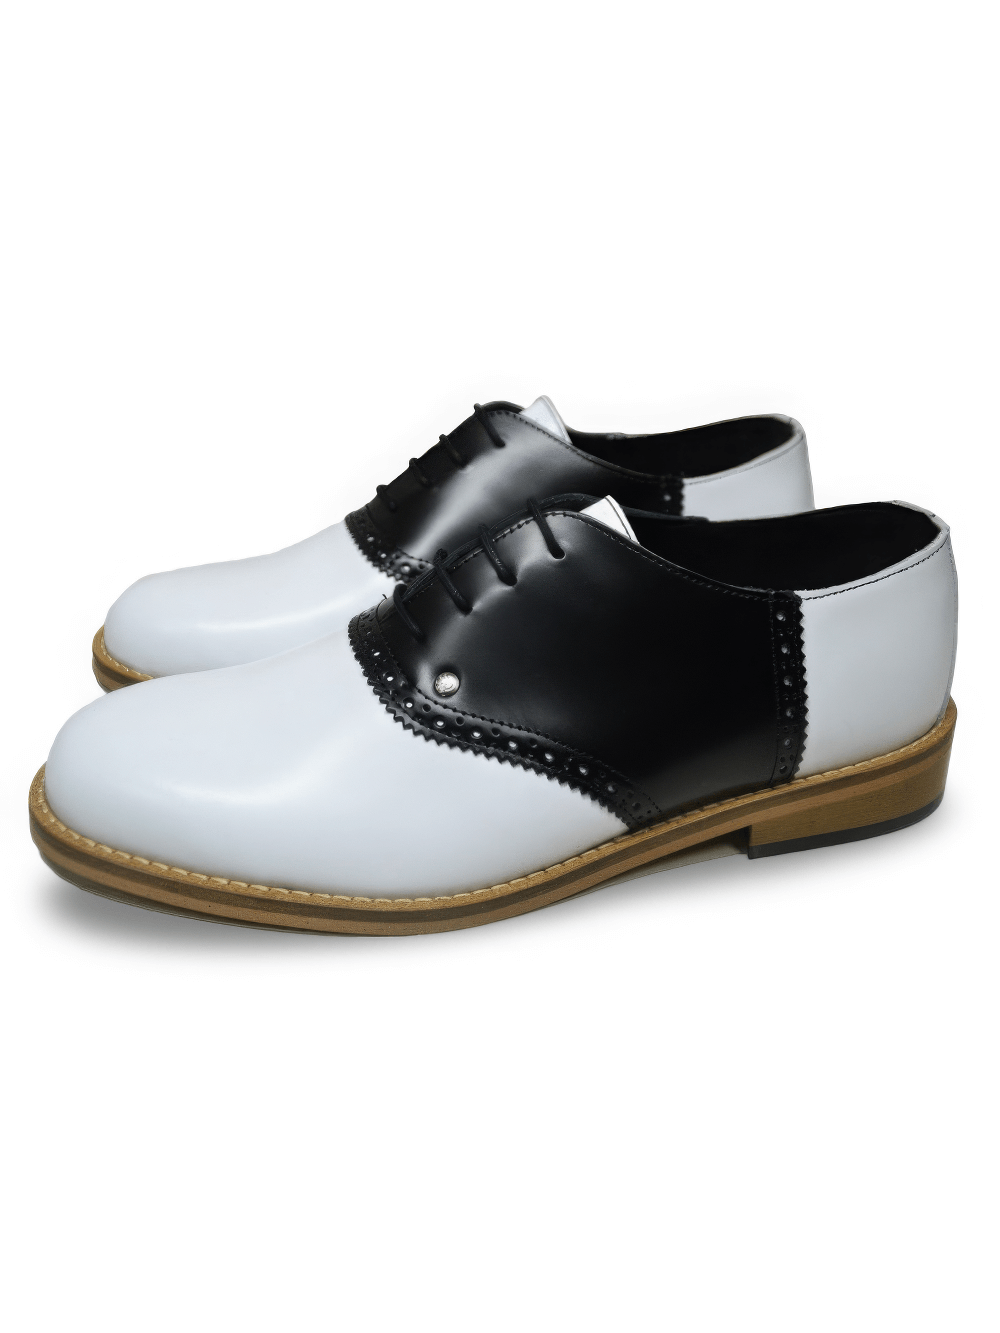 Unisex Black-White Lace-Up Bowling Shoes with Flat Sole